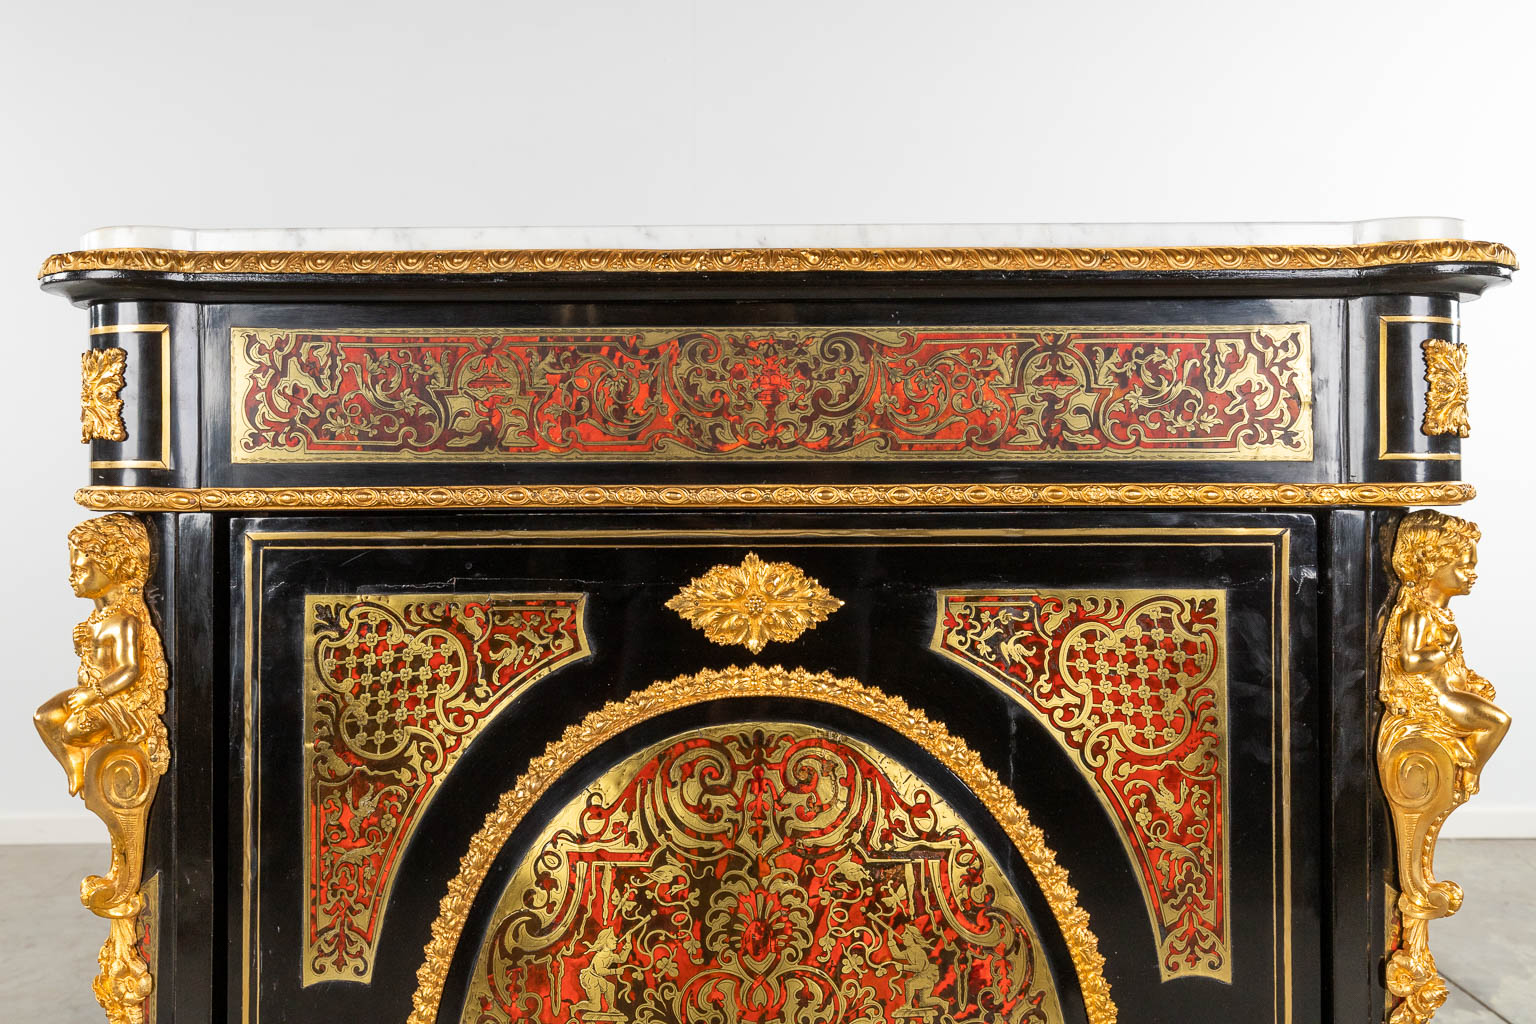 A one-door cabinet, Boulle, tortoiseshell and copper inlay, Napoleon 3, 19th C. (D:48 x W:90 x H:111 cm)